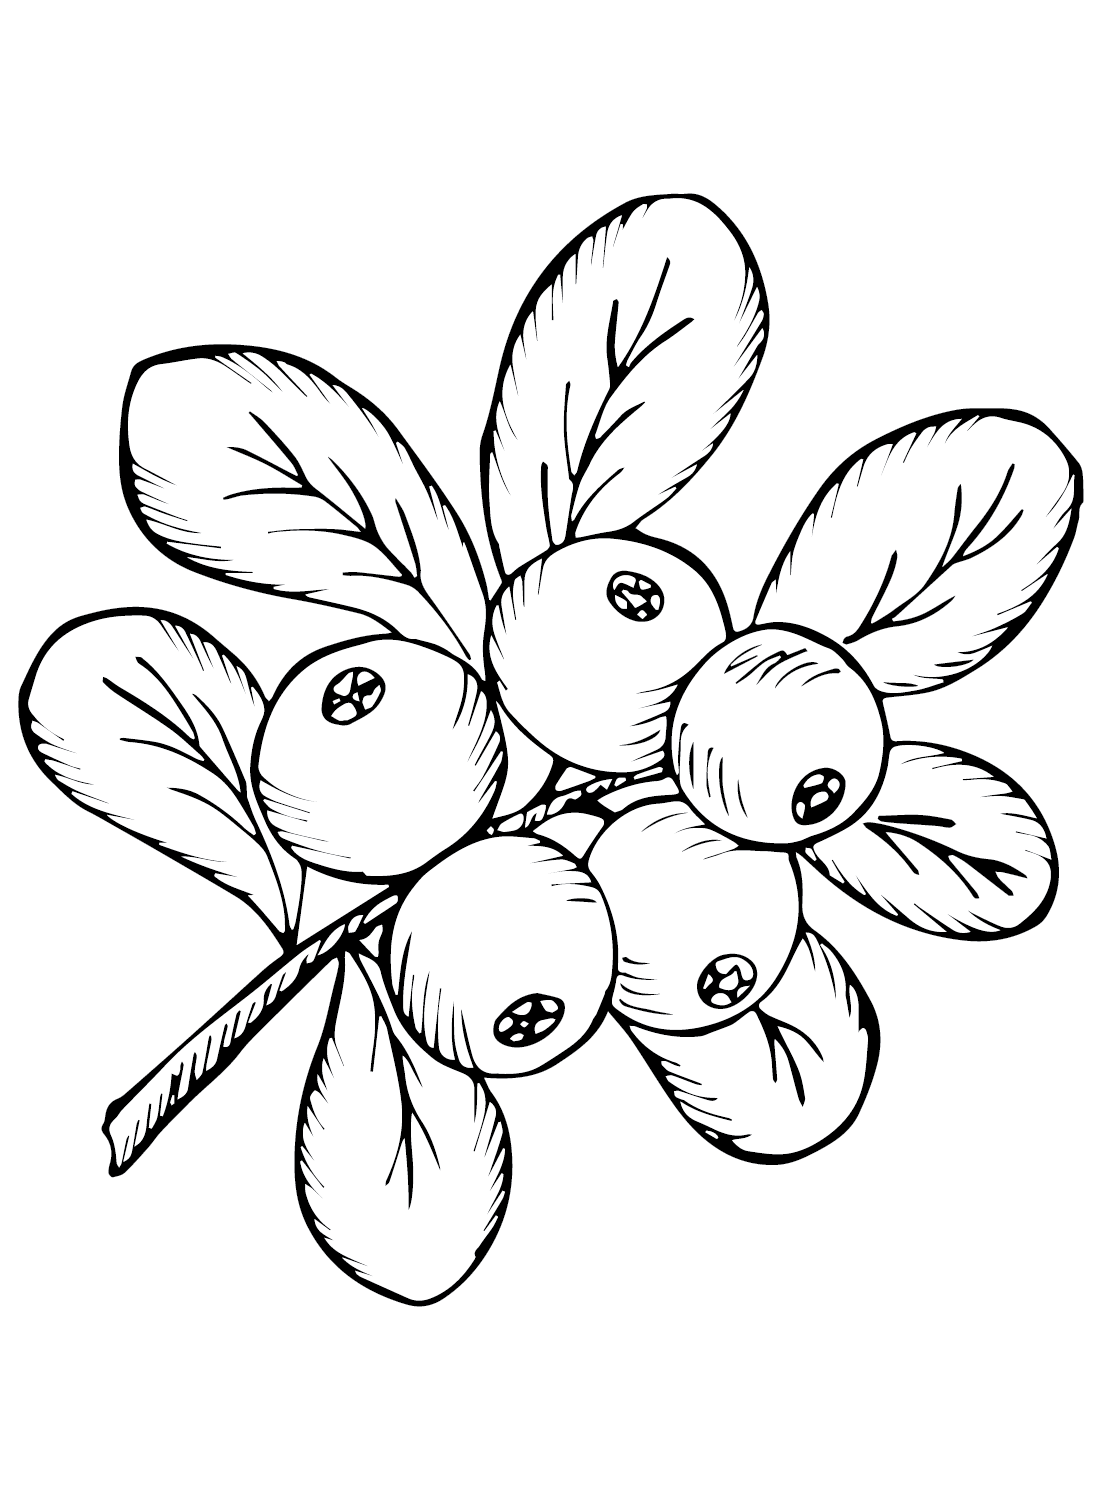 Cranberry coloring pages printable for free download